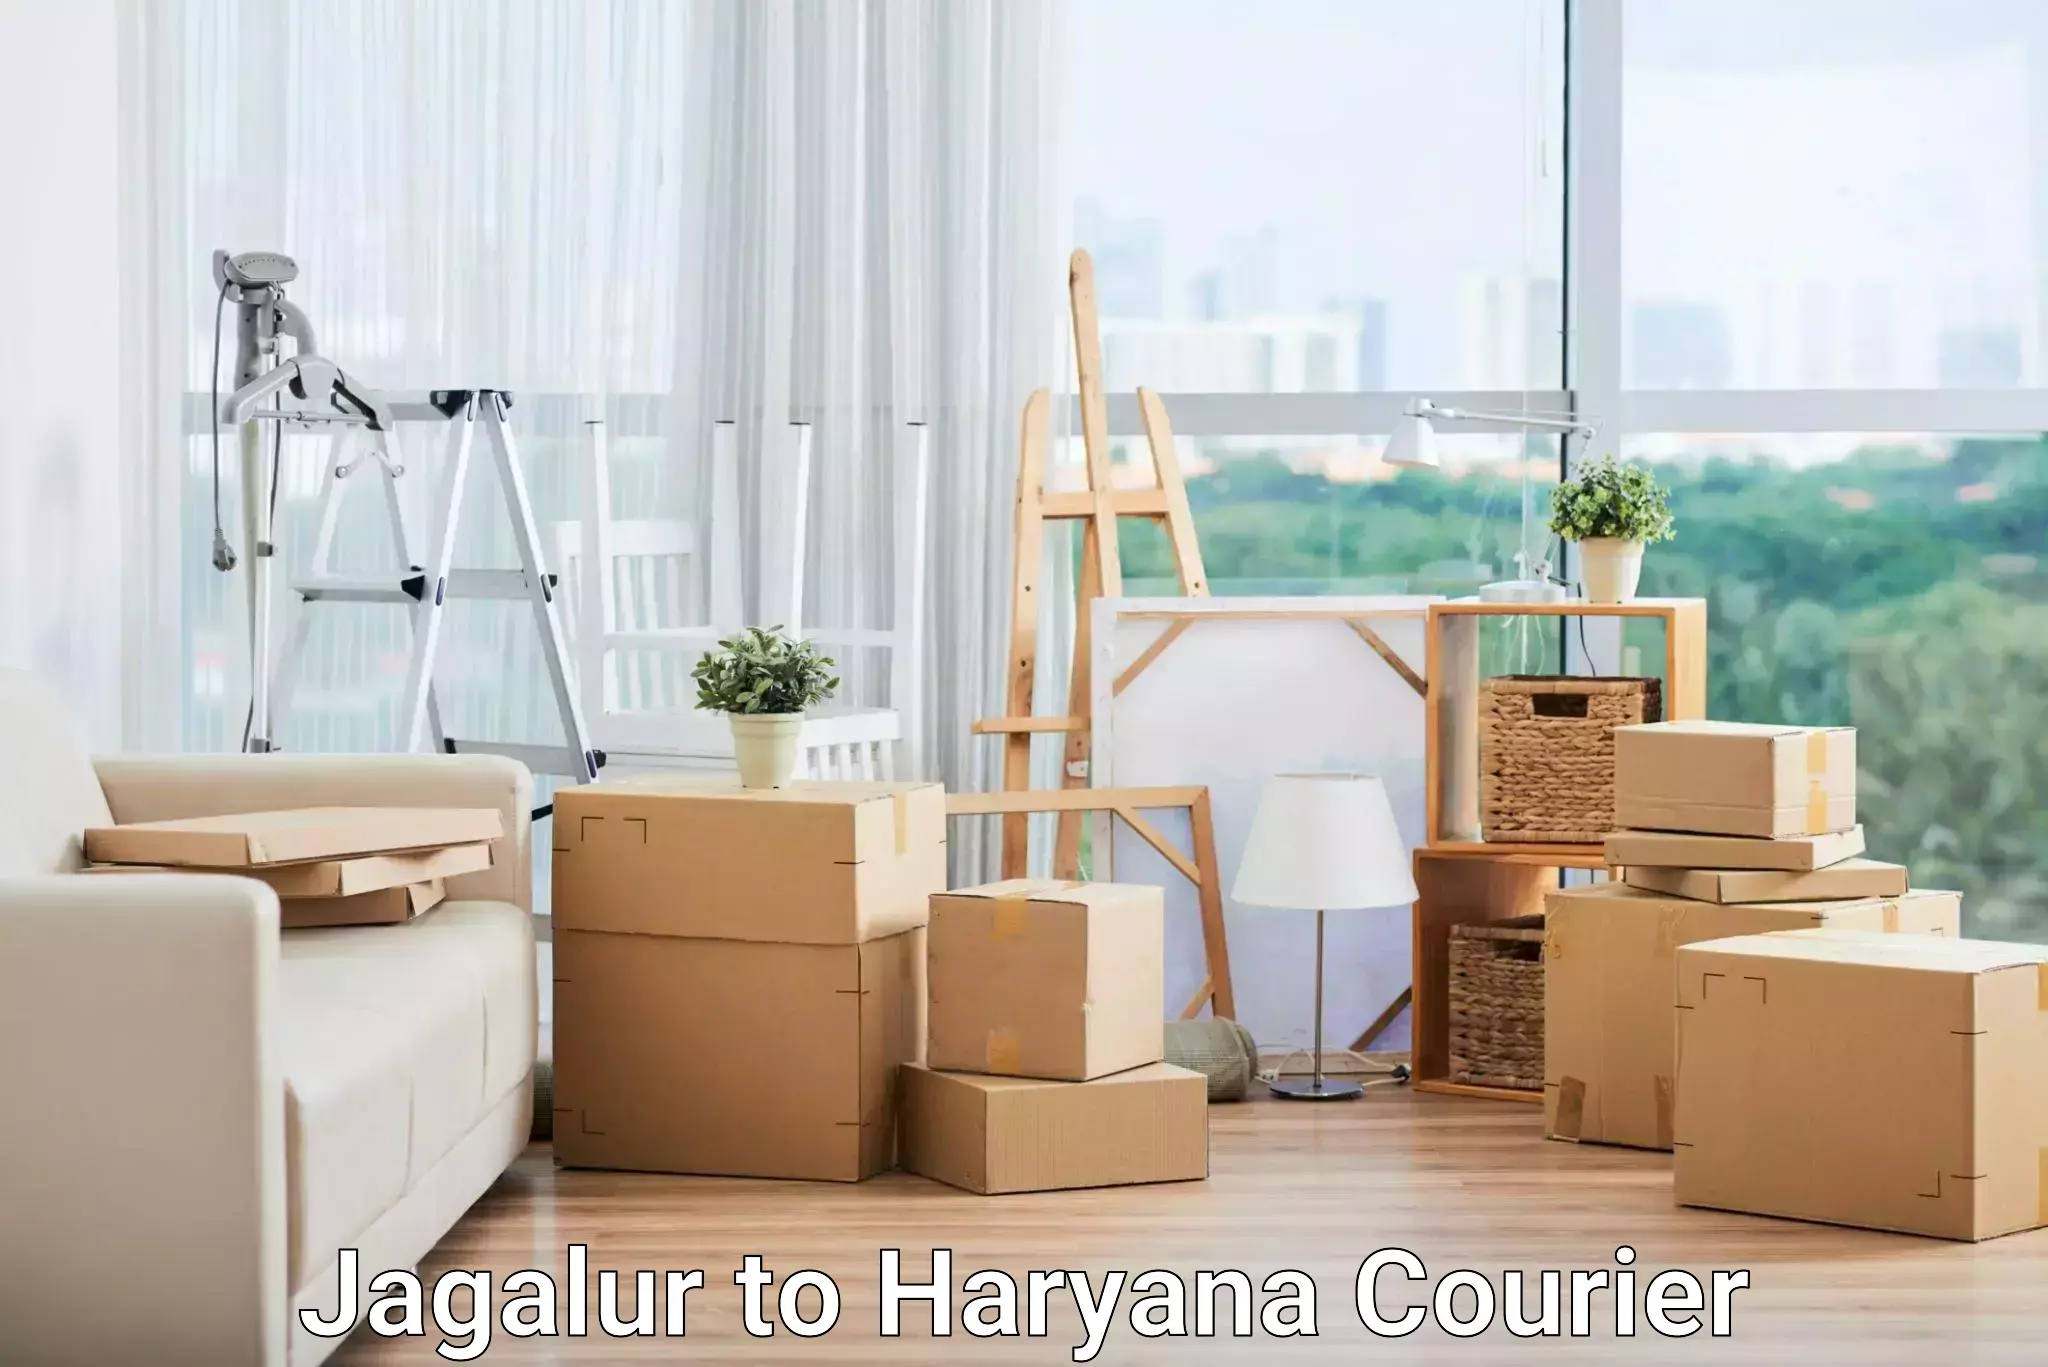 24/7 courier service Jagalur to Haryana